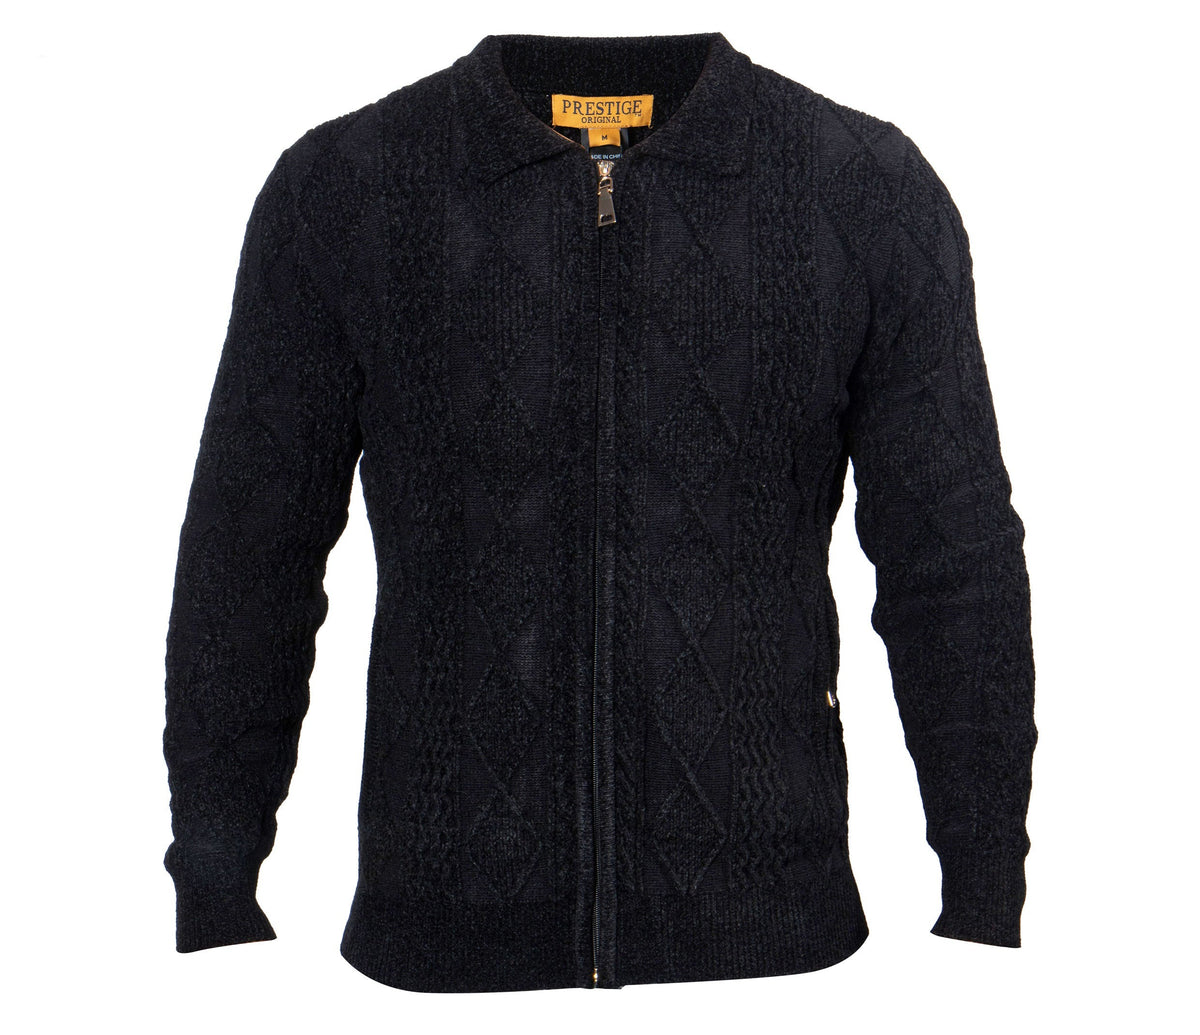 Prestige Black Knitted Zip Up Sweater - Dudes Boutique